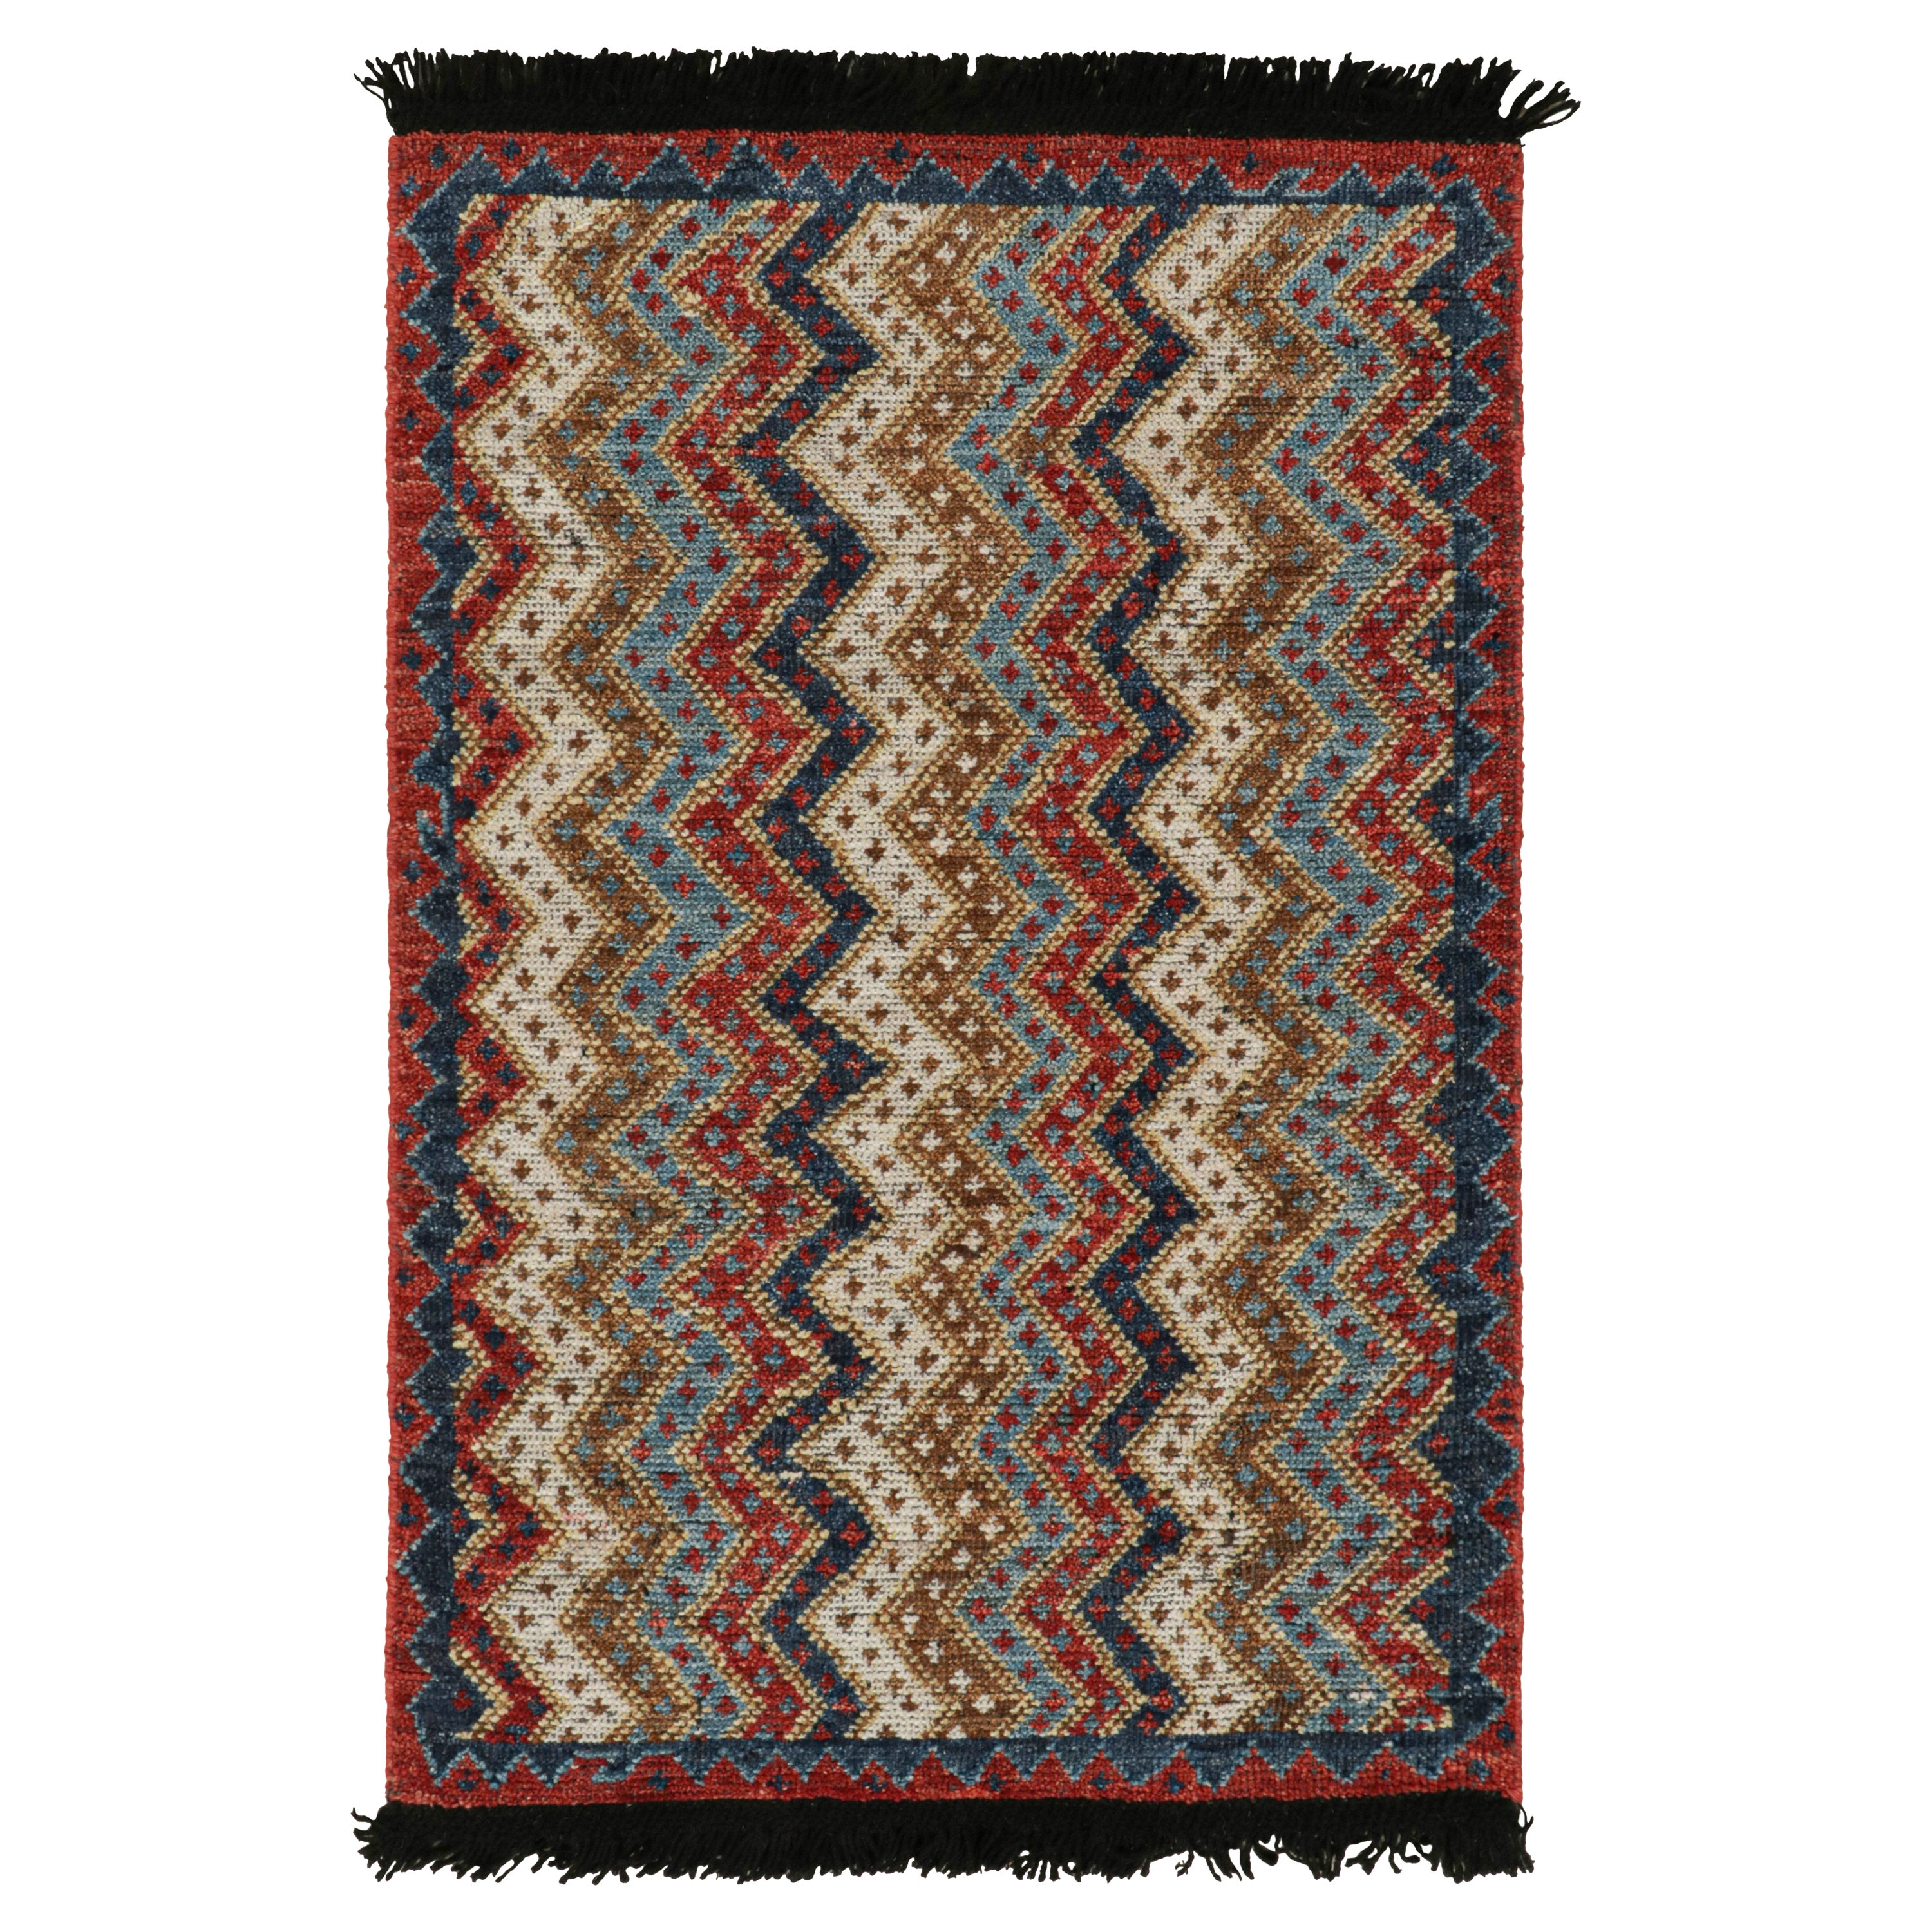 Rug & Kilim's Antique Tribal Style Rug in Red, Blue and Beige-Brown Chevrons (Tapis ancien de style tribal à chevrons rouges, bleus et beige-brun) en vente